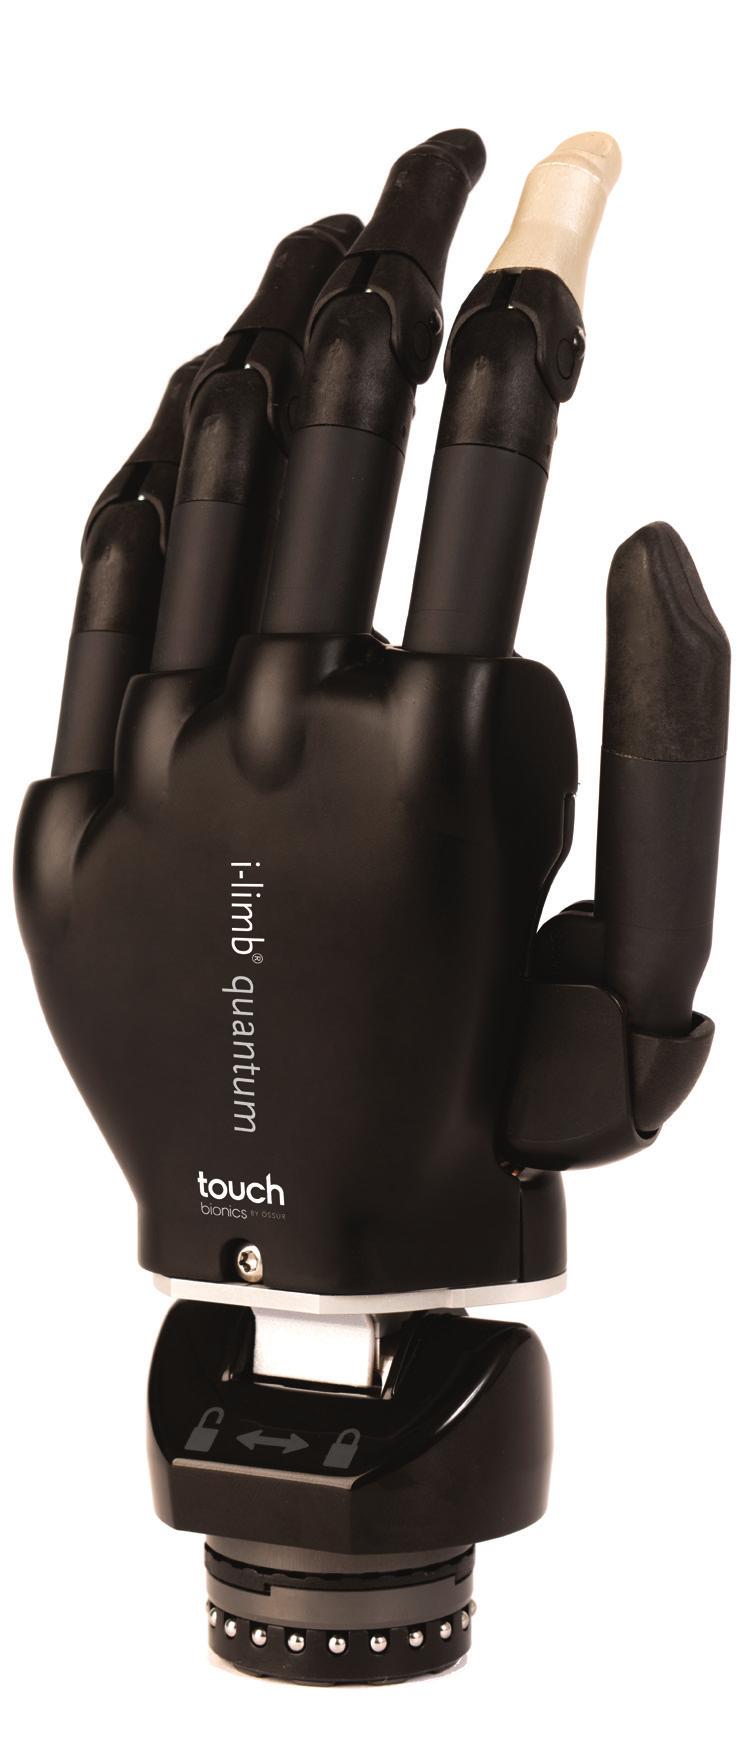 Touch screen enabled index finger tip 5 individually motorized, articulating digits 4 methods of control for ultimate lifestyle freedom gesture contol